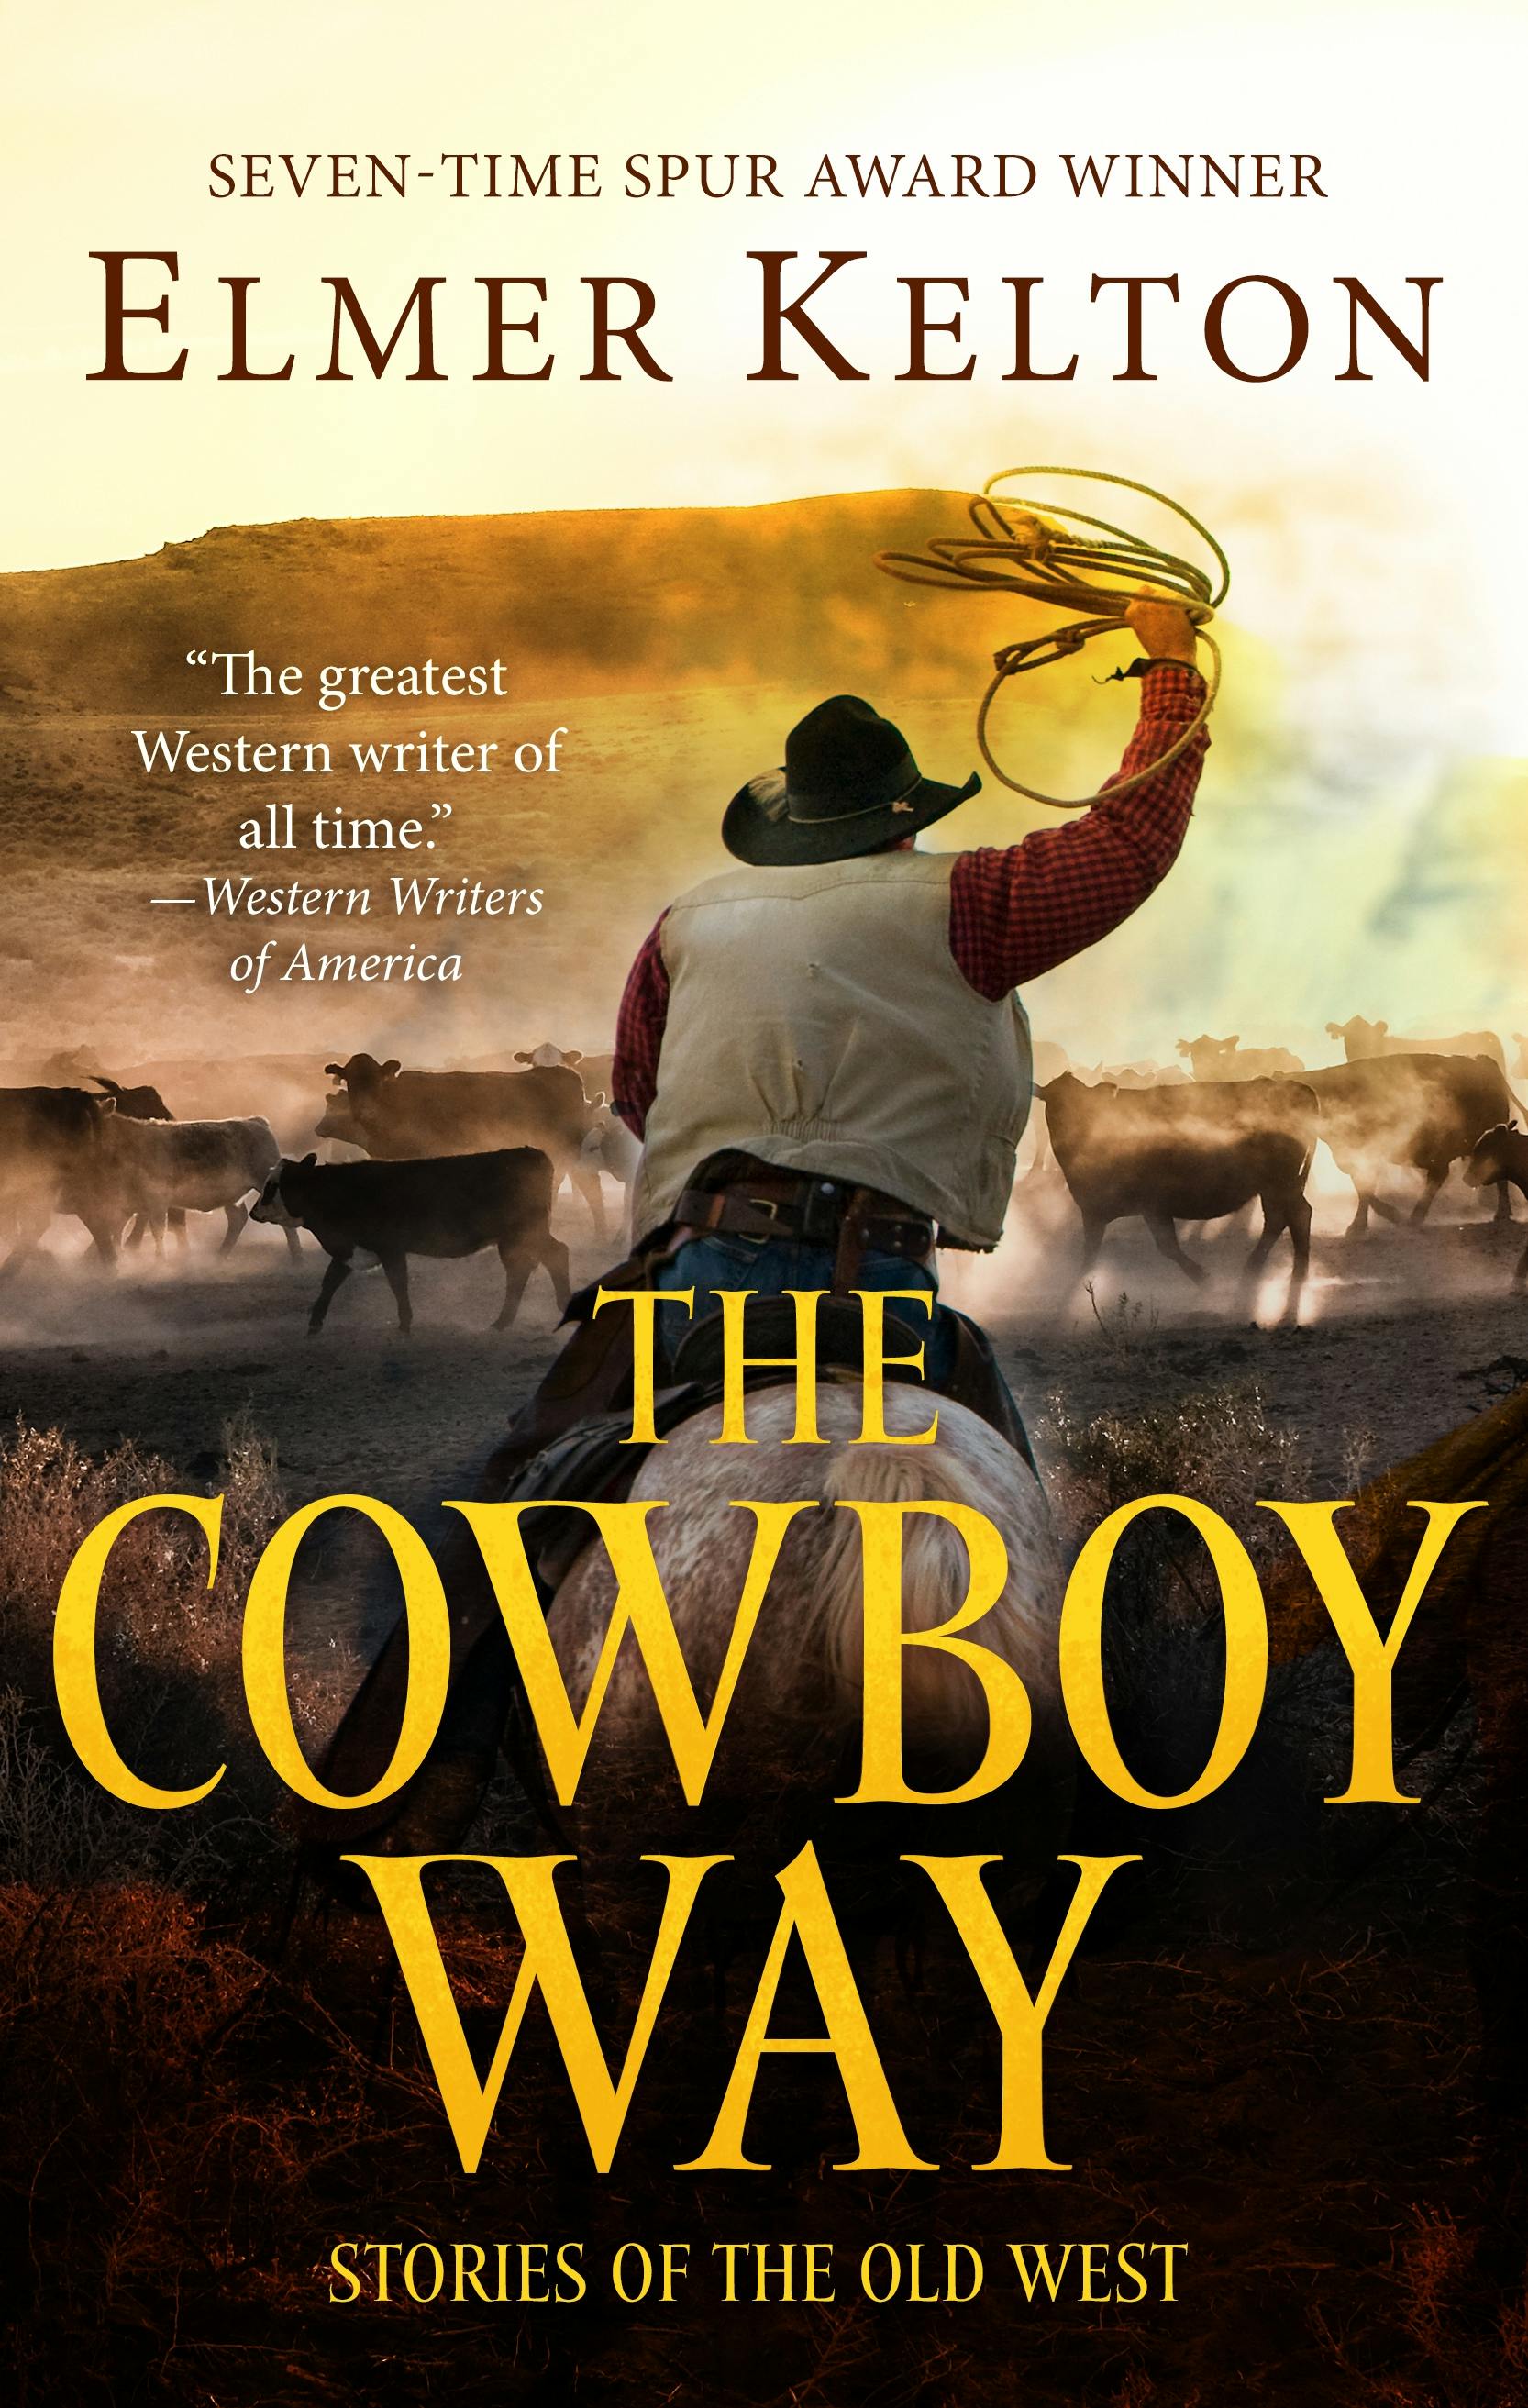 Cover for the book titled as: The Cowboy Way